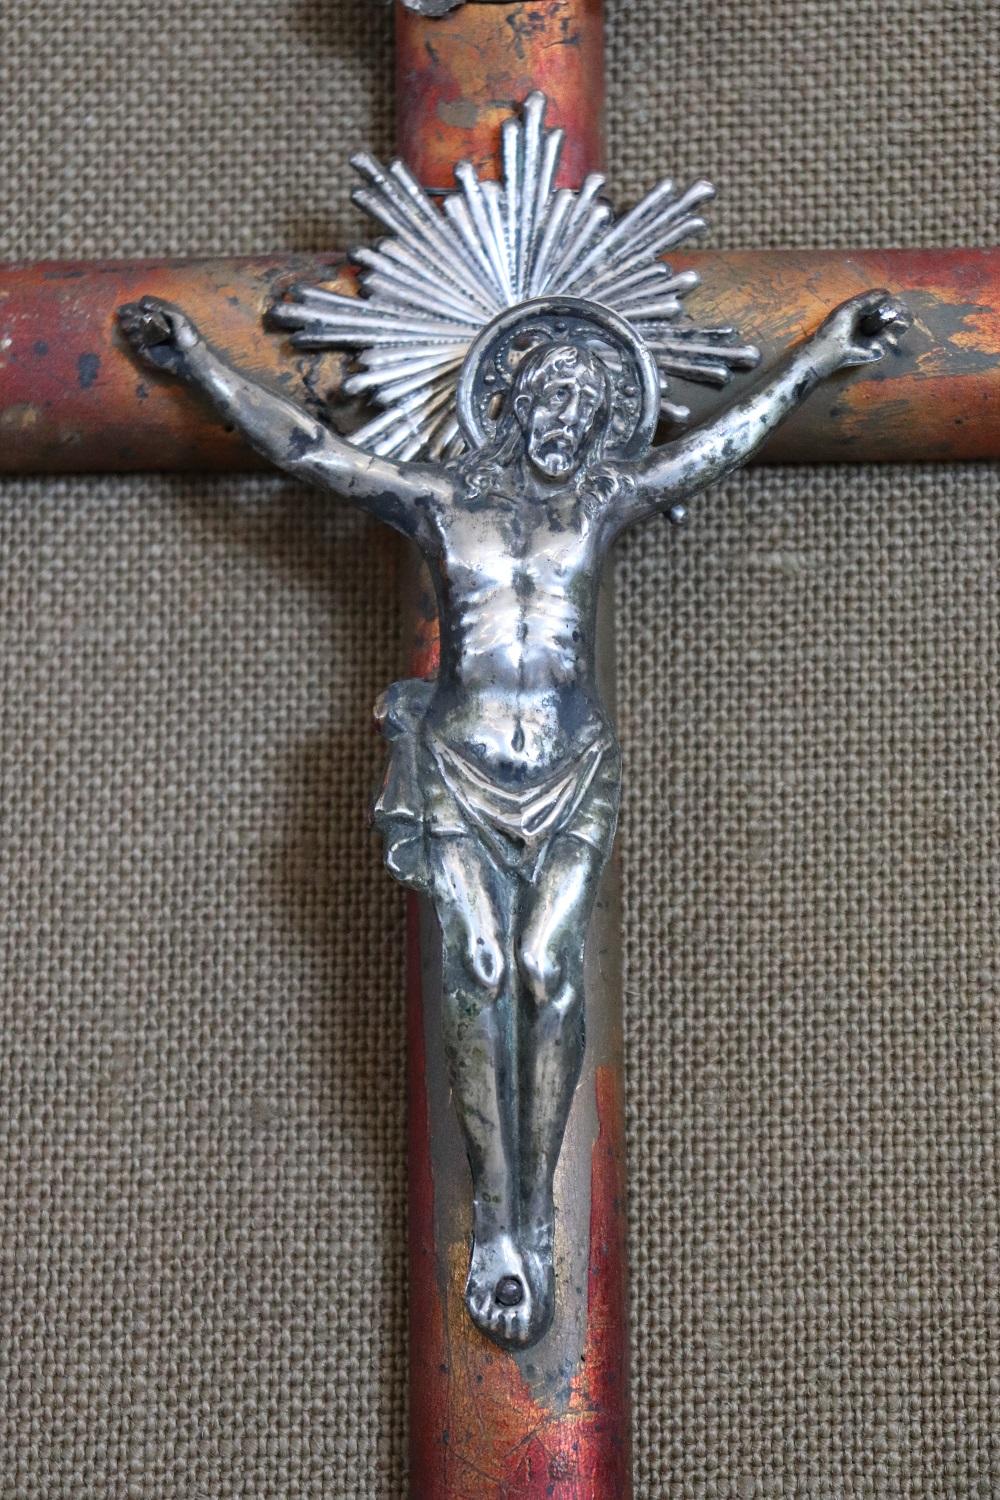 Refined and delicate figure of Jesus Christ on the cross in silver, 1880s. Great artistic quality please look at the details from the face to the body. The Christ is mounted on a wooden cross in a glass case.